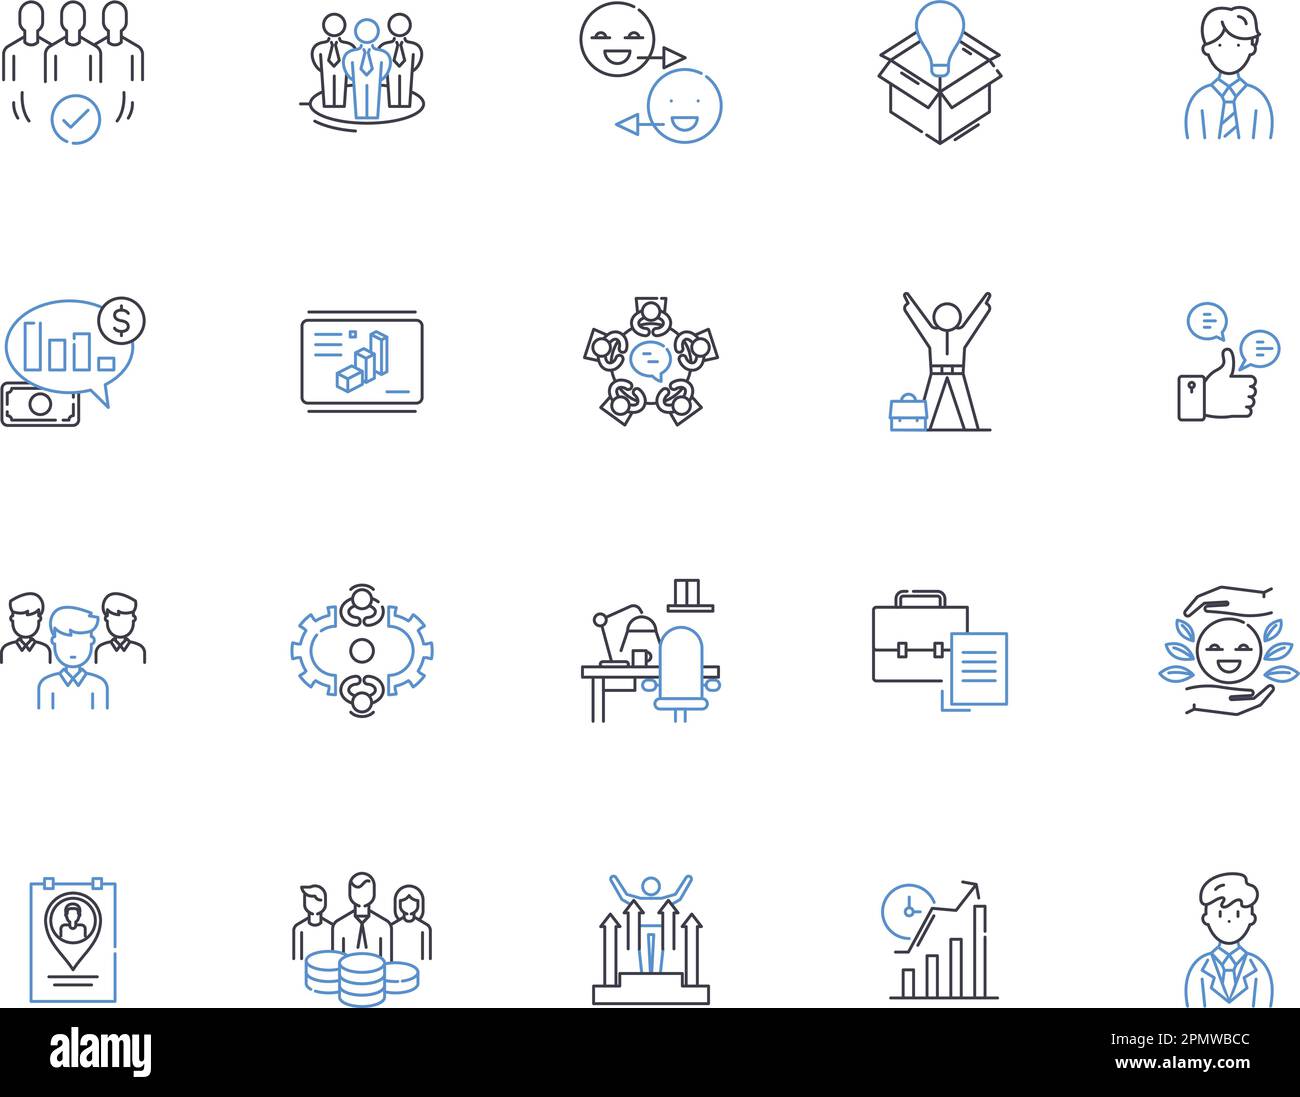 Manager outline icons collection. Supervisor, Leader, Administrator, Director, Organizer, Strategist, Advisor vector and illustration concept set Stock Vector